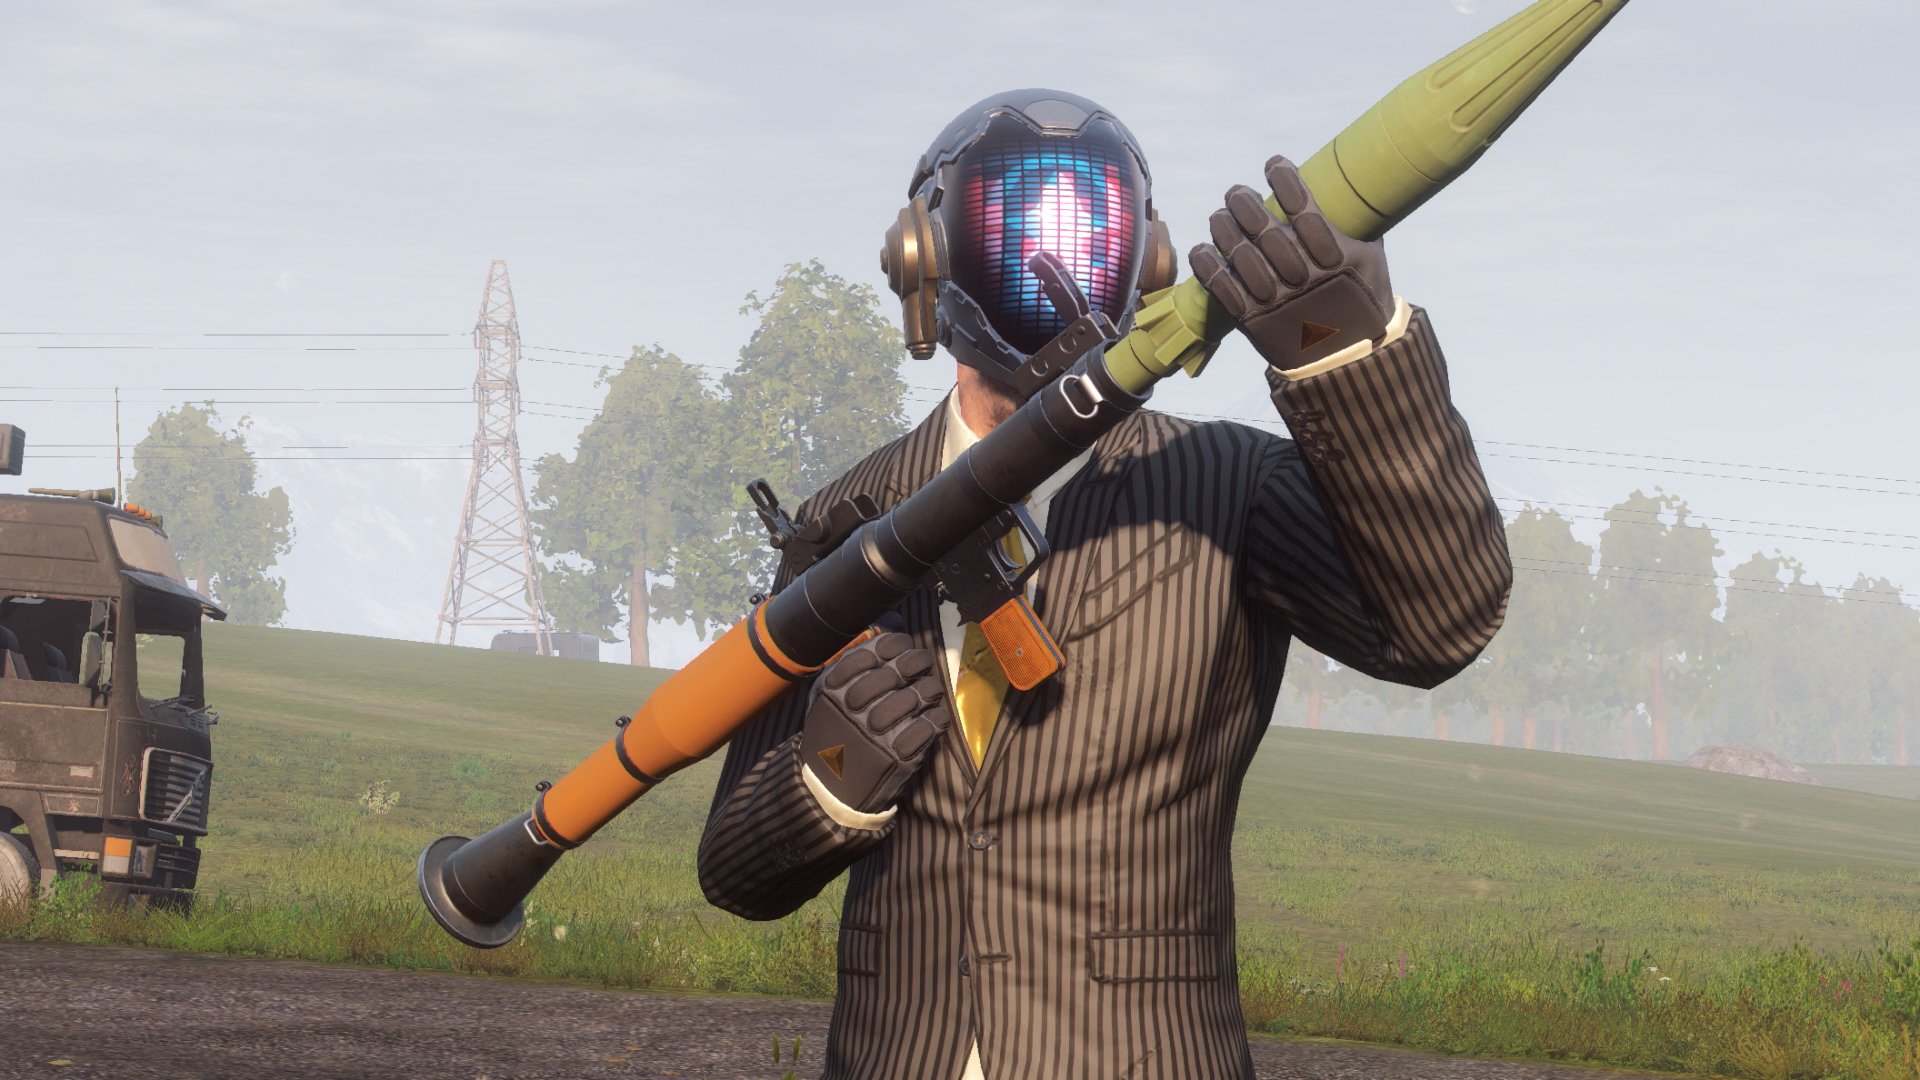 download h1z1 ps4 2022